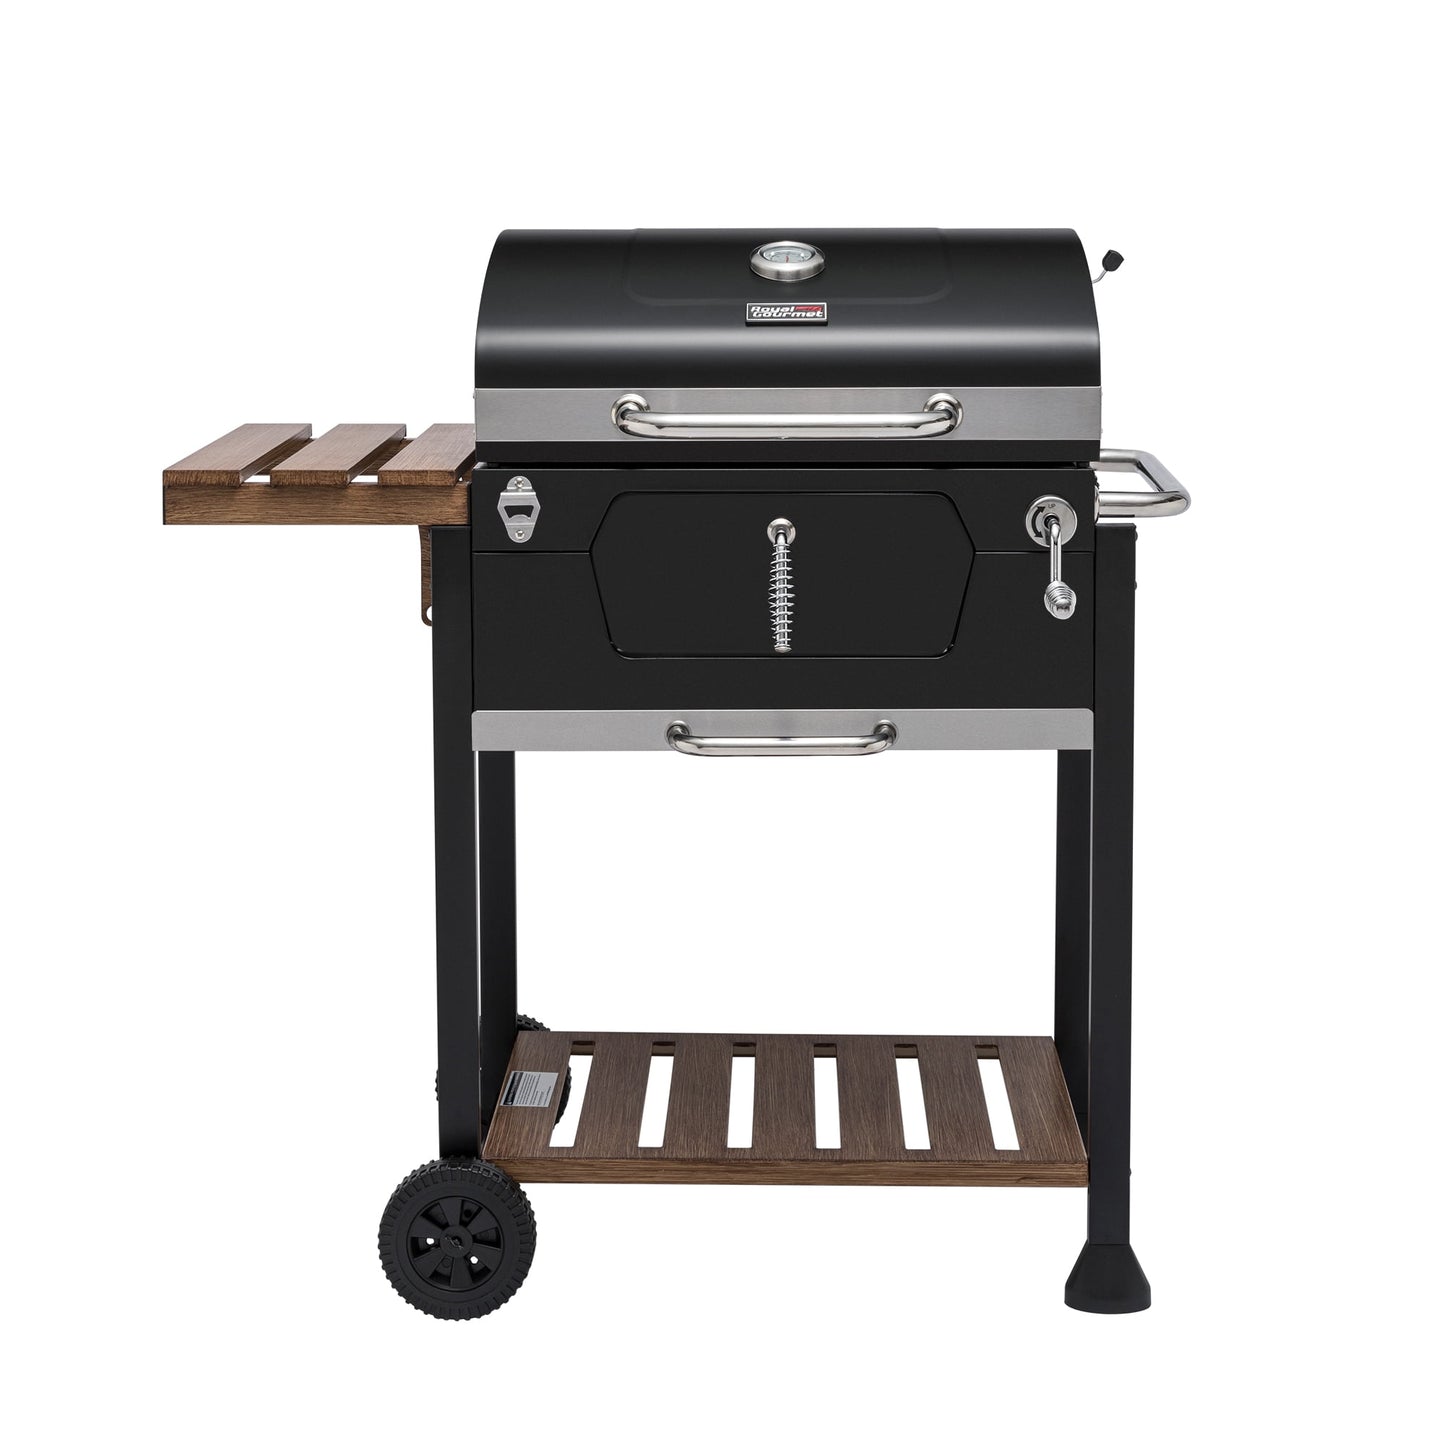 Royal Gourmet CD1824M 24" Charcoal Grill with Handle and Folding Table,